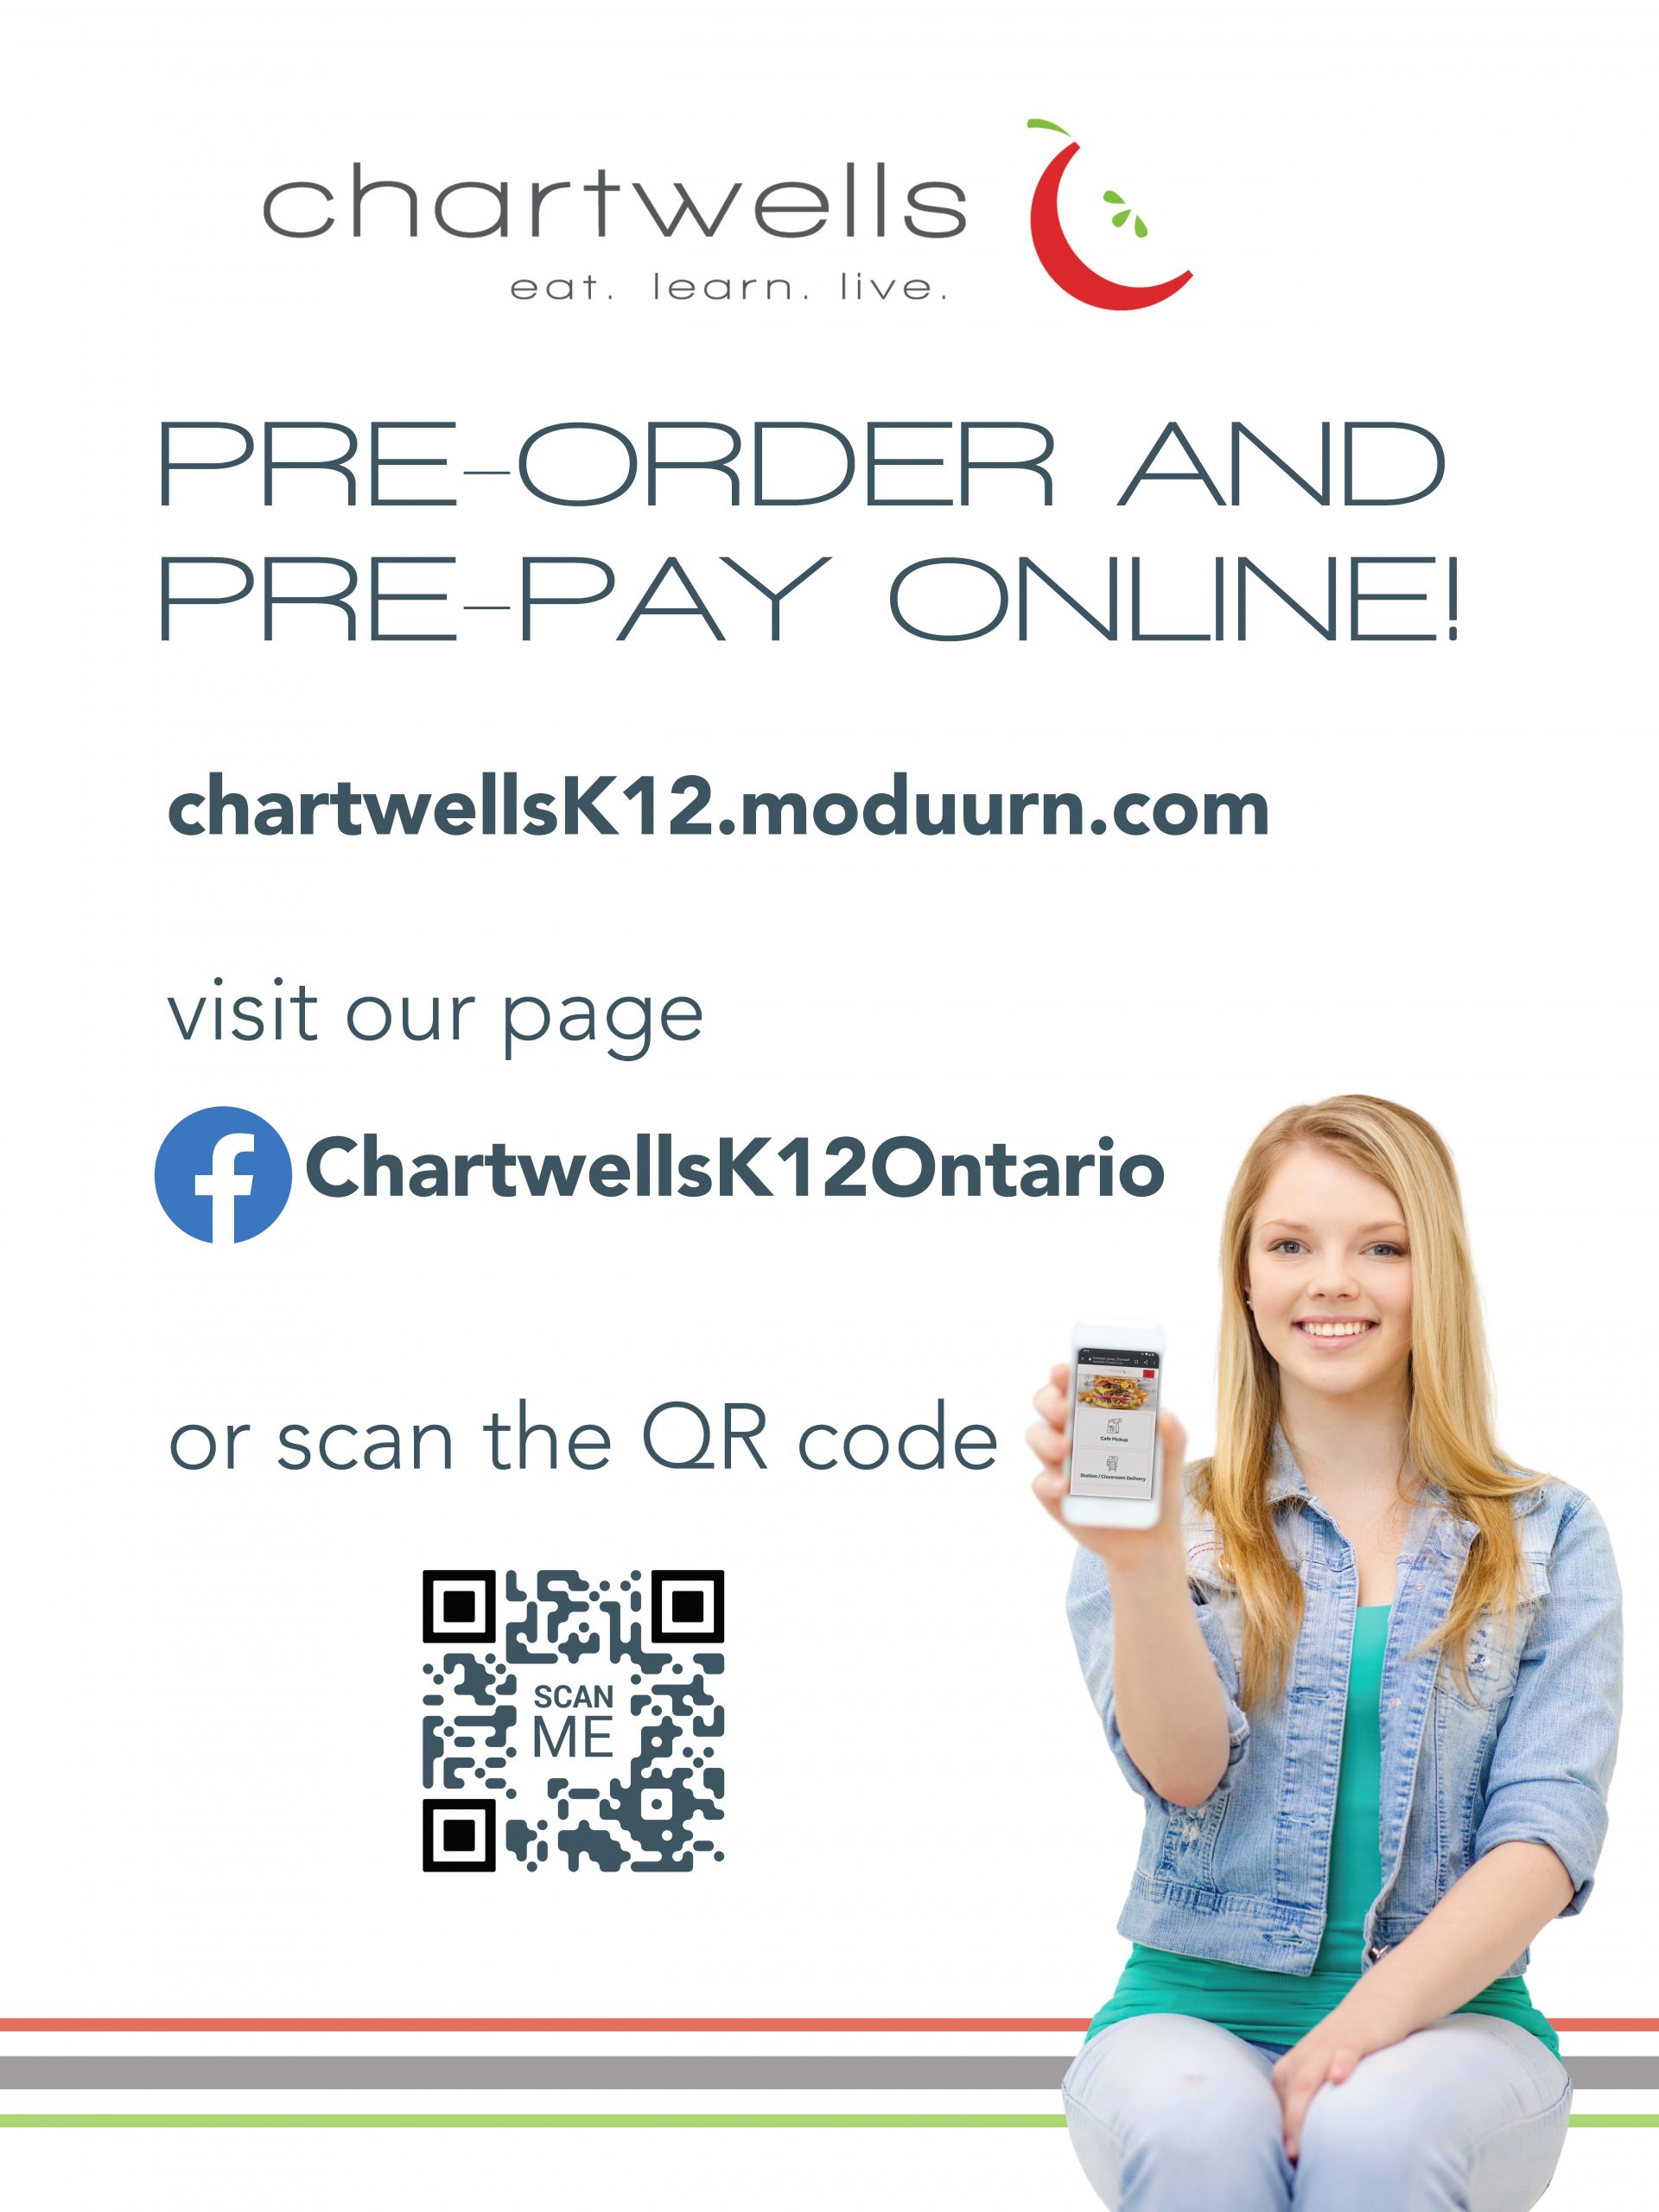 Pre-Order and Pre-Pay Online with Chartwells!